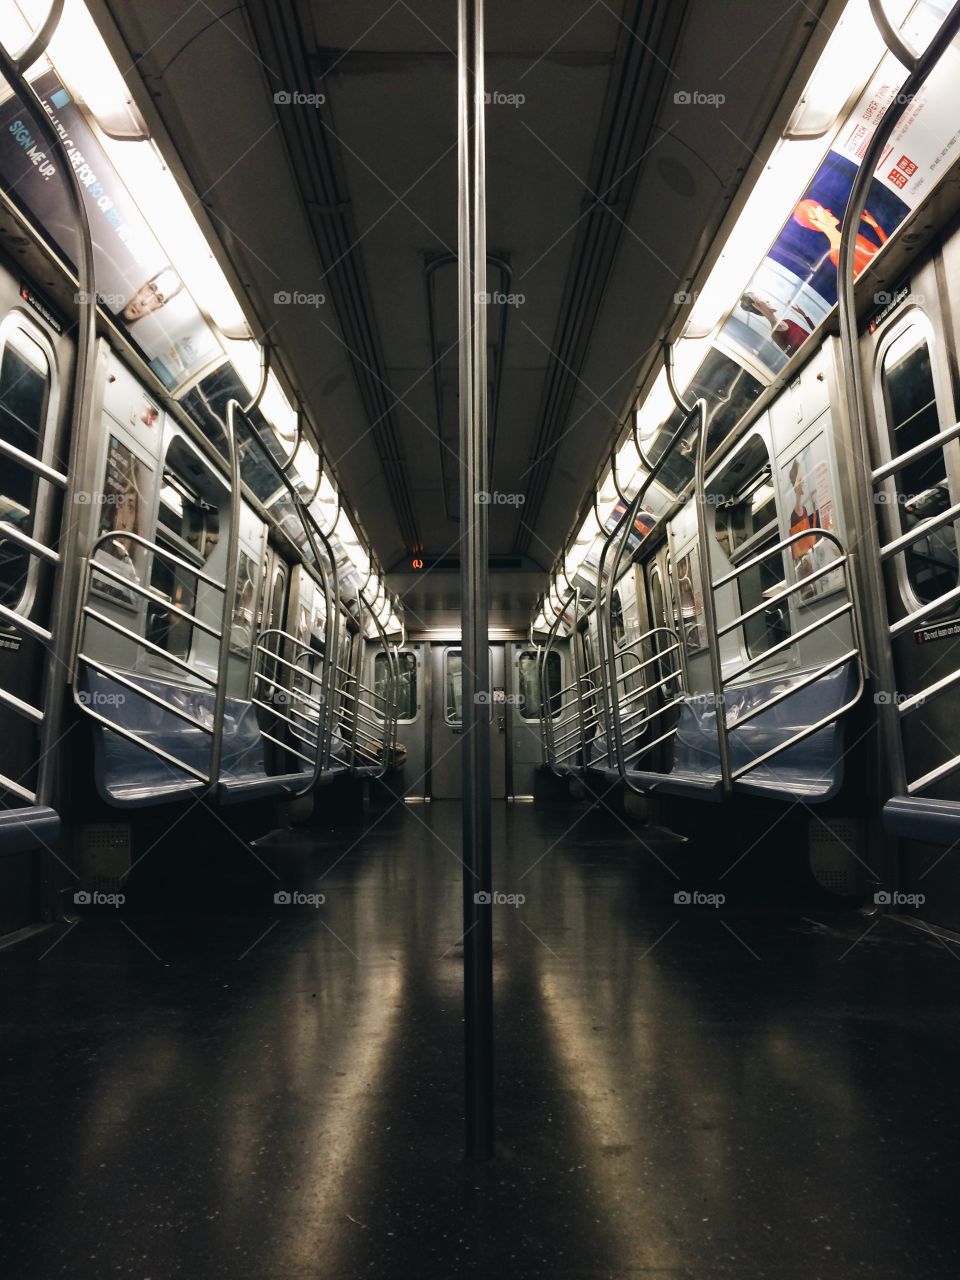 No Person, Subway System, Indoors, Business, Transportation System